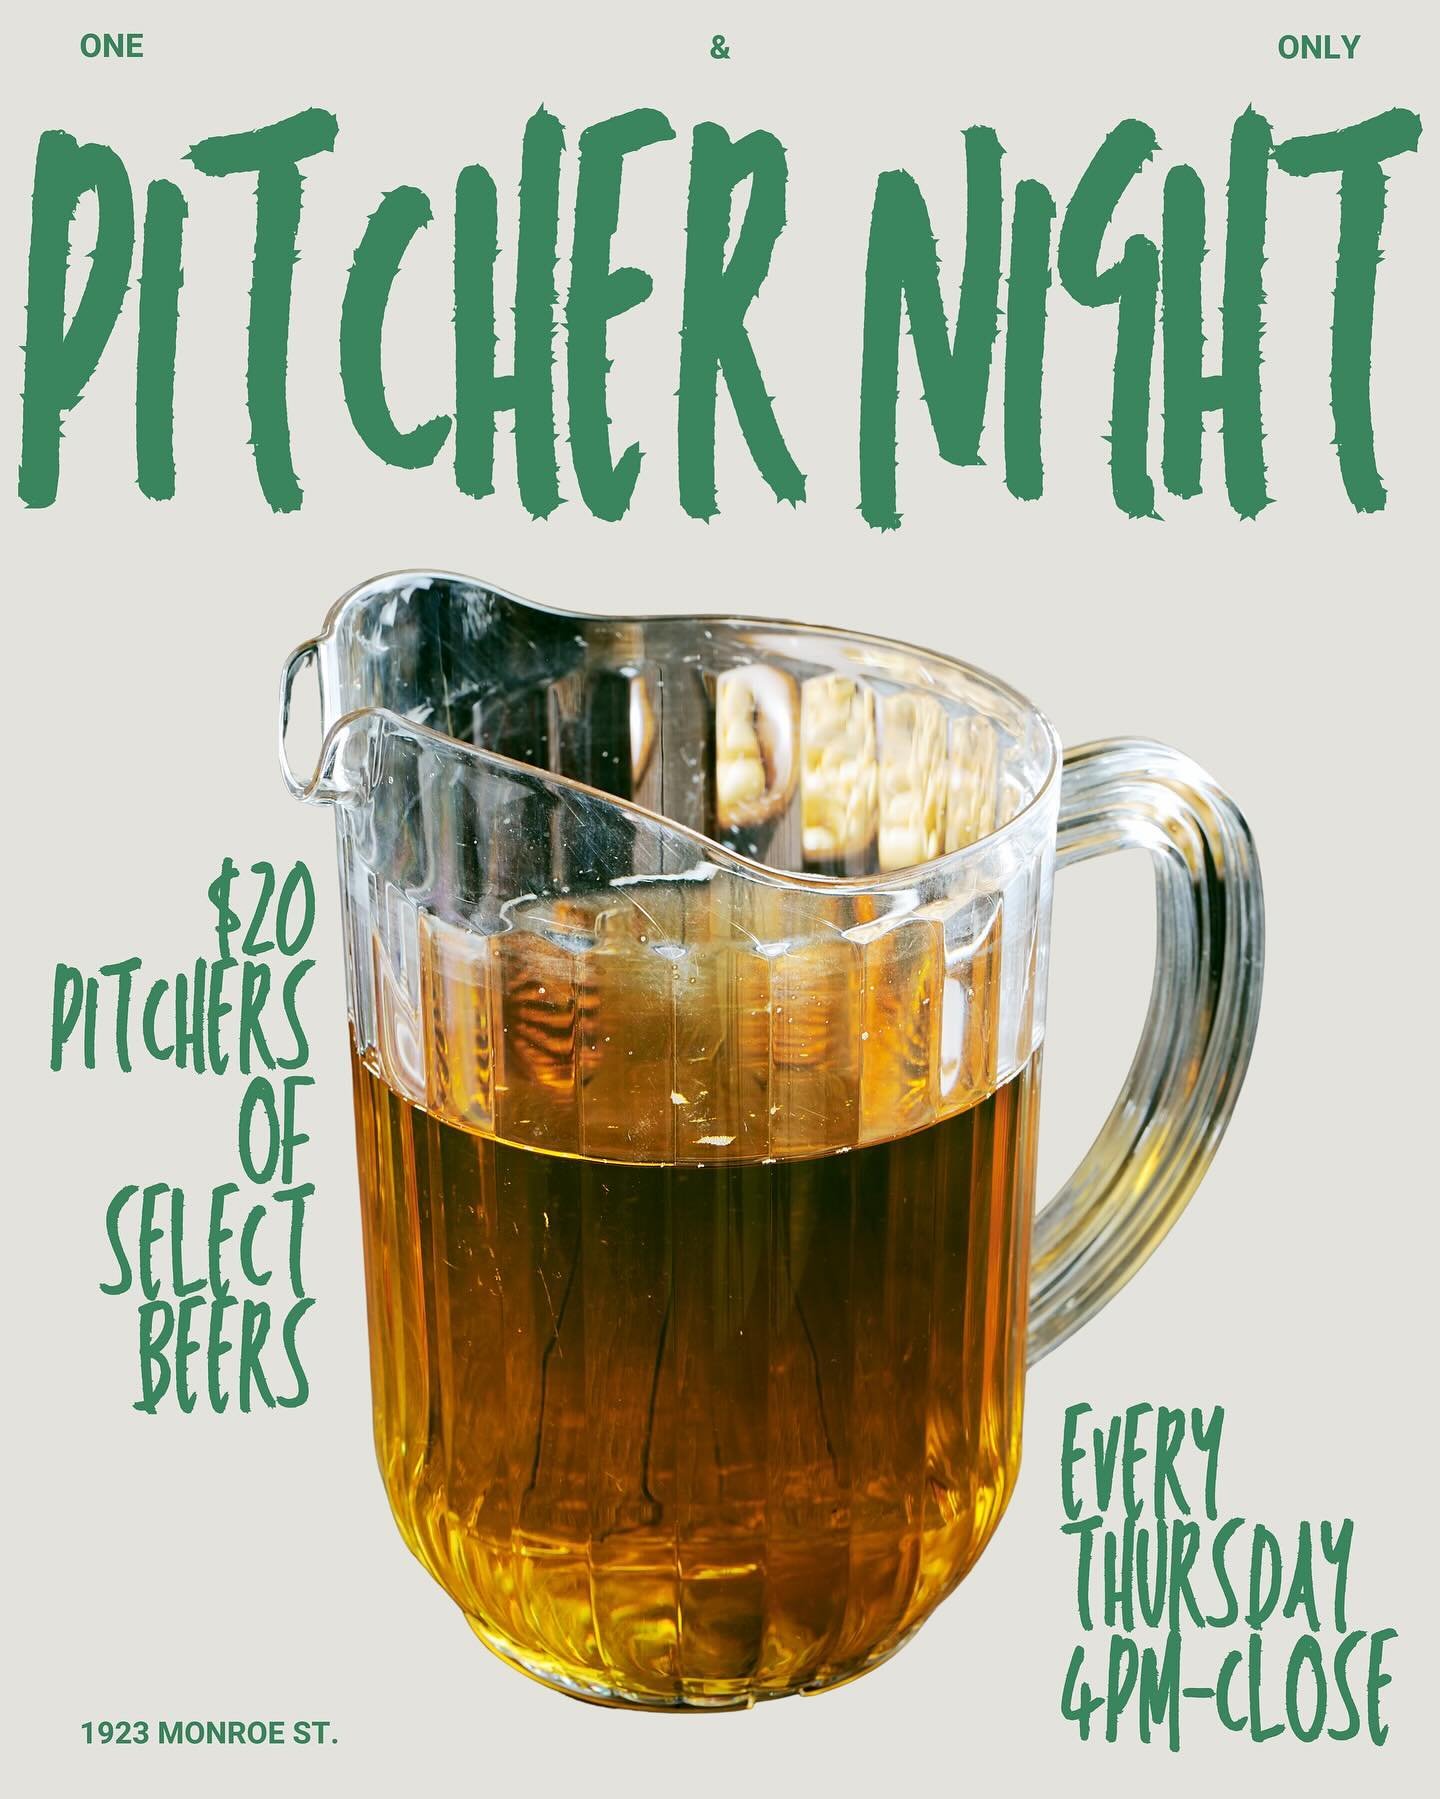 Today we&rsquo;re kicking off 🍻PITCHER NIGHT🍻

$20 pitchers of select beers from 4pm-close. Come sample our amazing beer menu and relive the Thirsty Thursdays of your youth 🤪

#oneandonlywi #pitchernight #thirstythursday